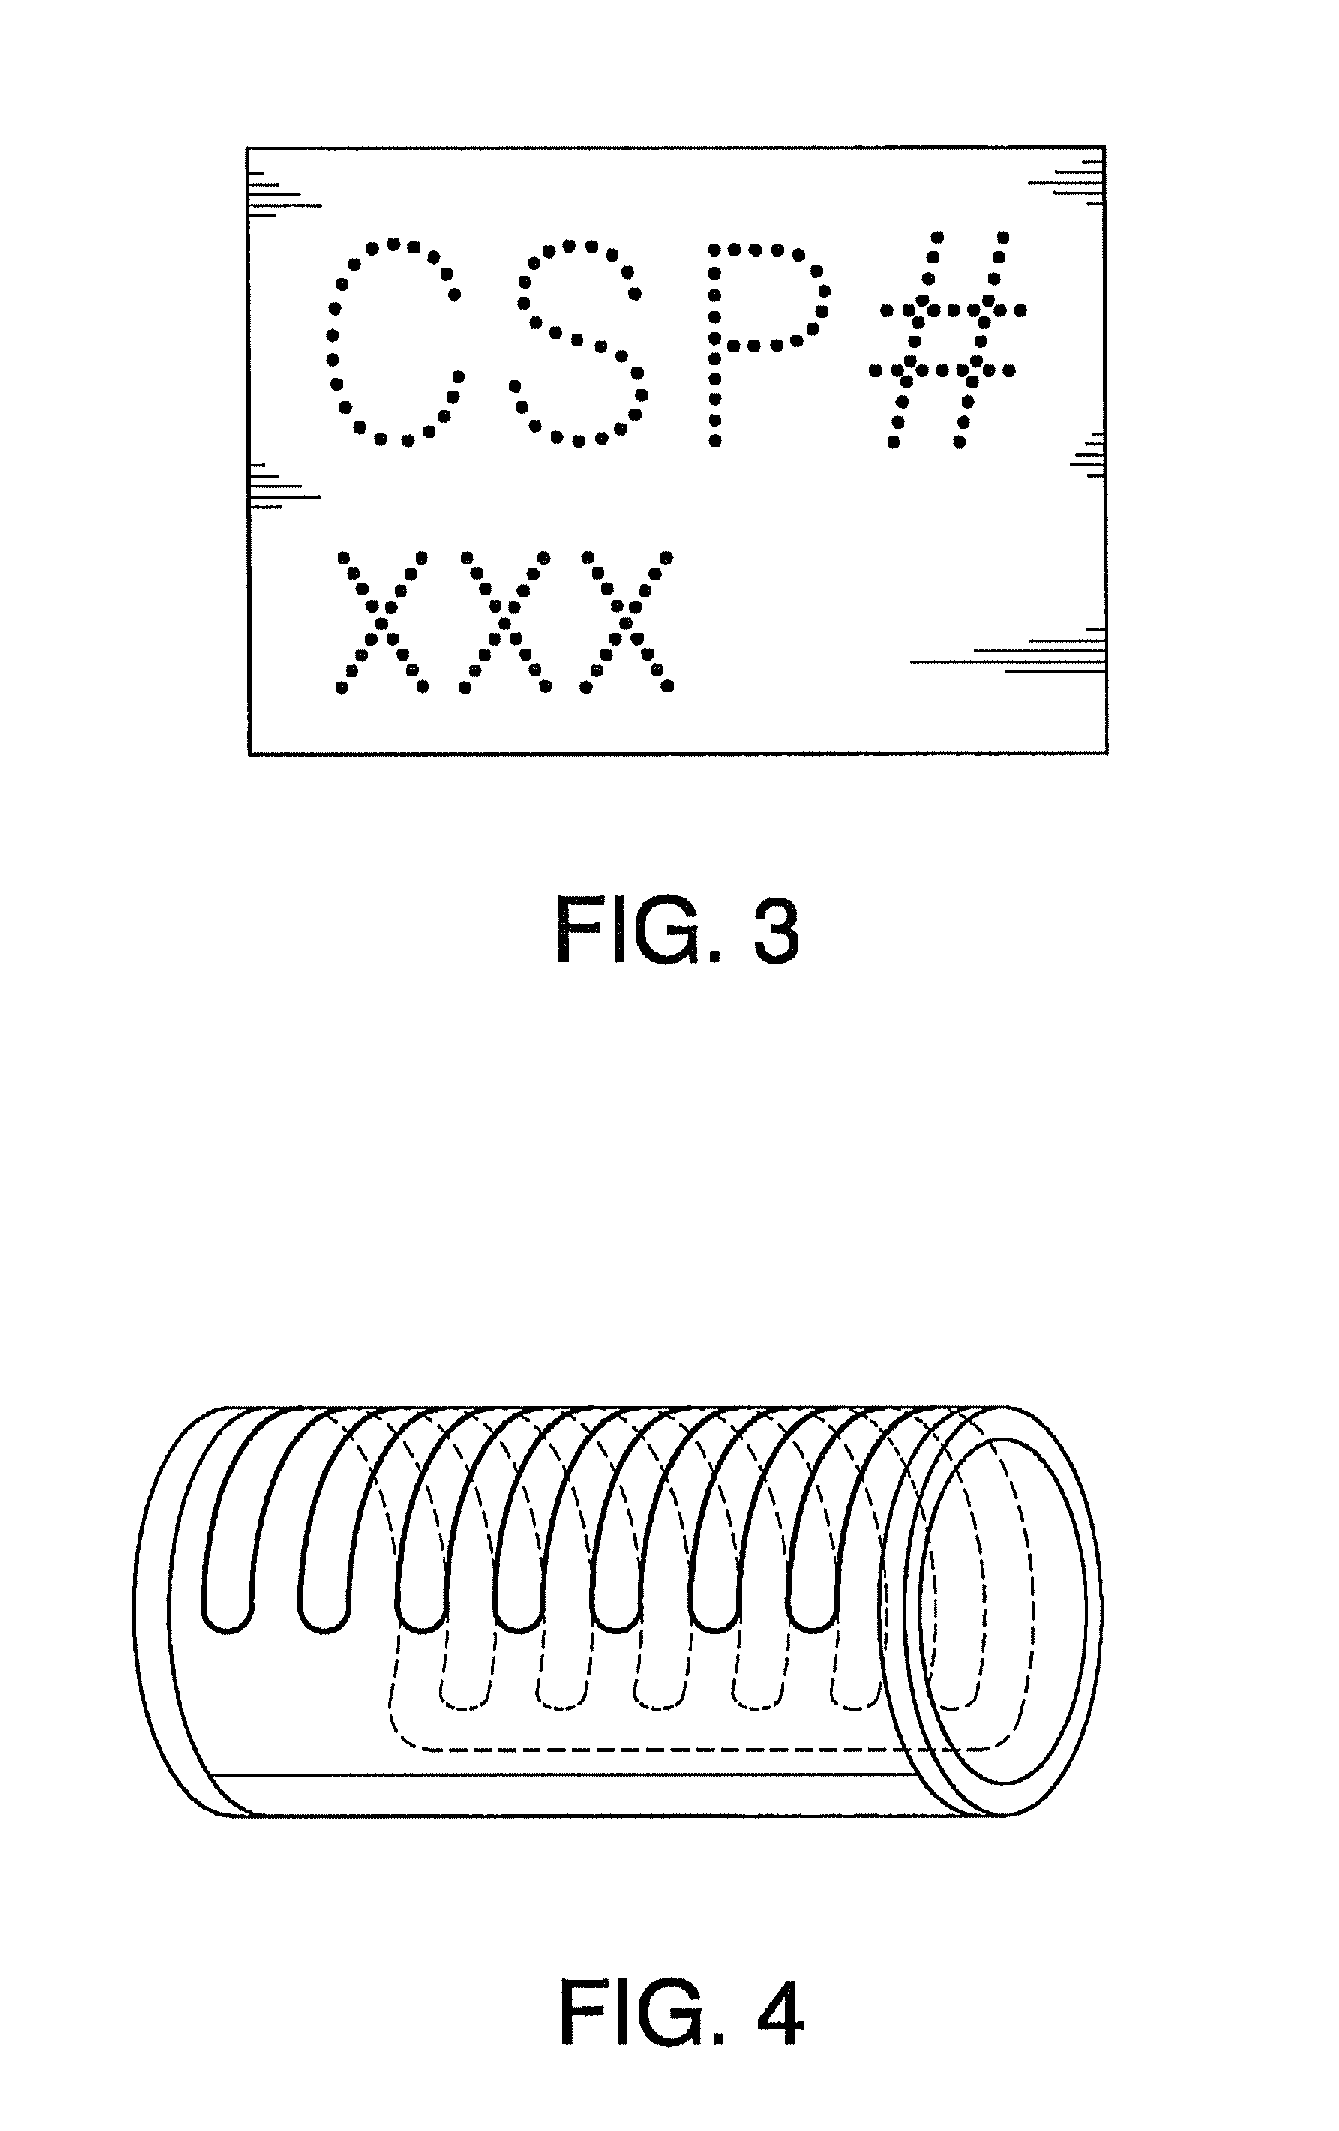 Method for Incorporating an Anti-Counterfeiting Device into a Multi-Walled Container and the Multi-Walled Container Containing Such Device